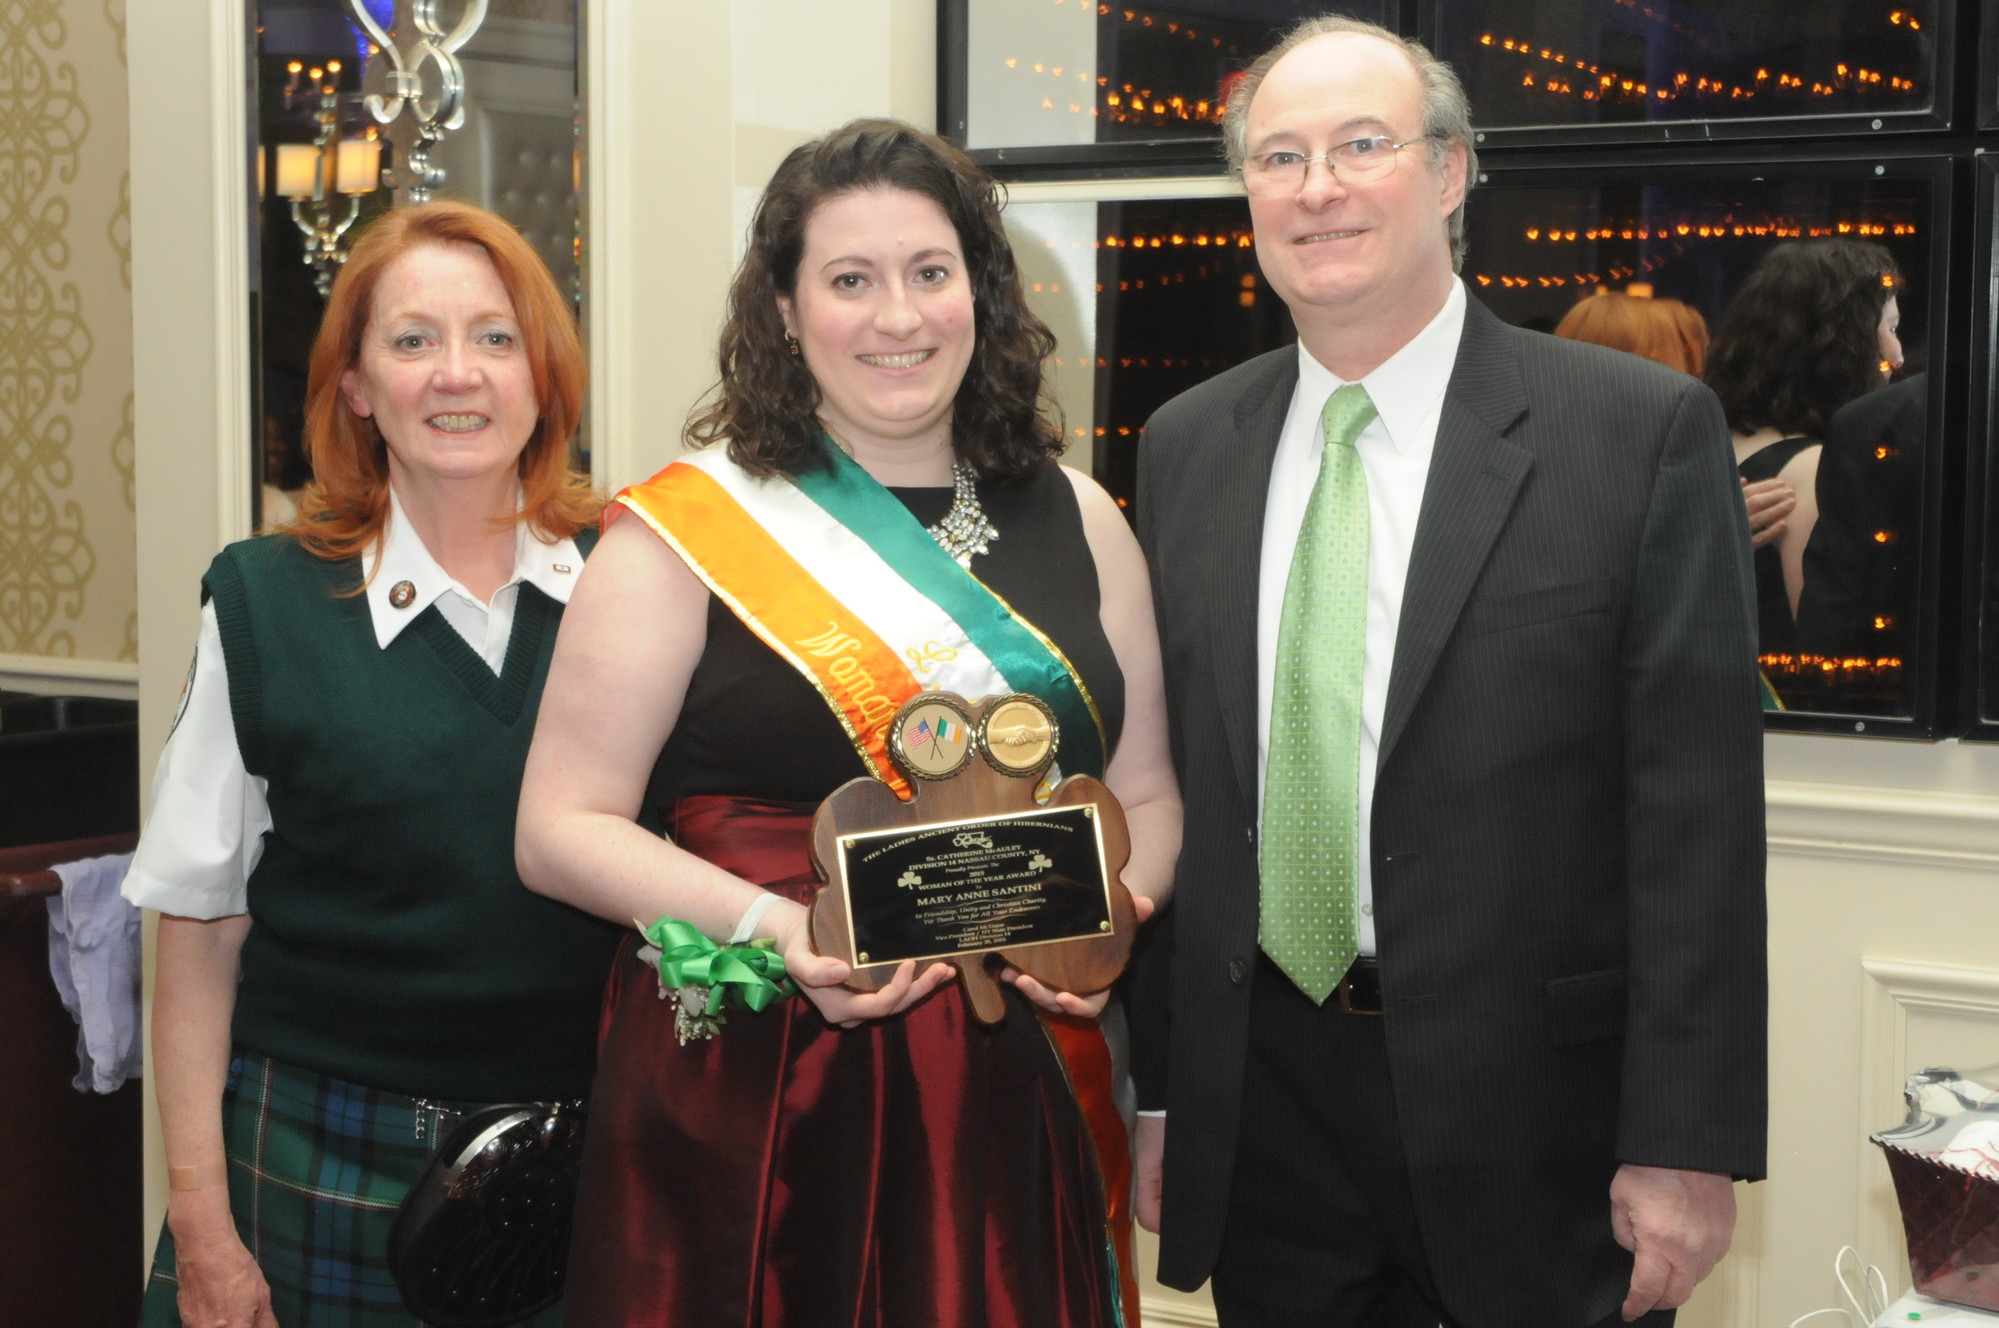 Mary Anne Santini, Lady of the Year with her parents, Albert and Mary Santini.